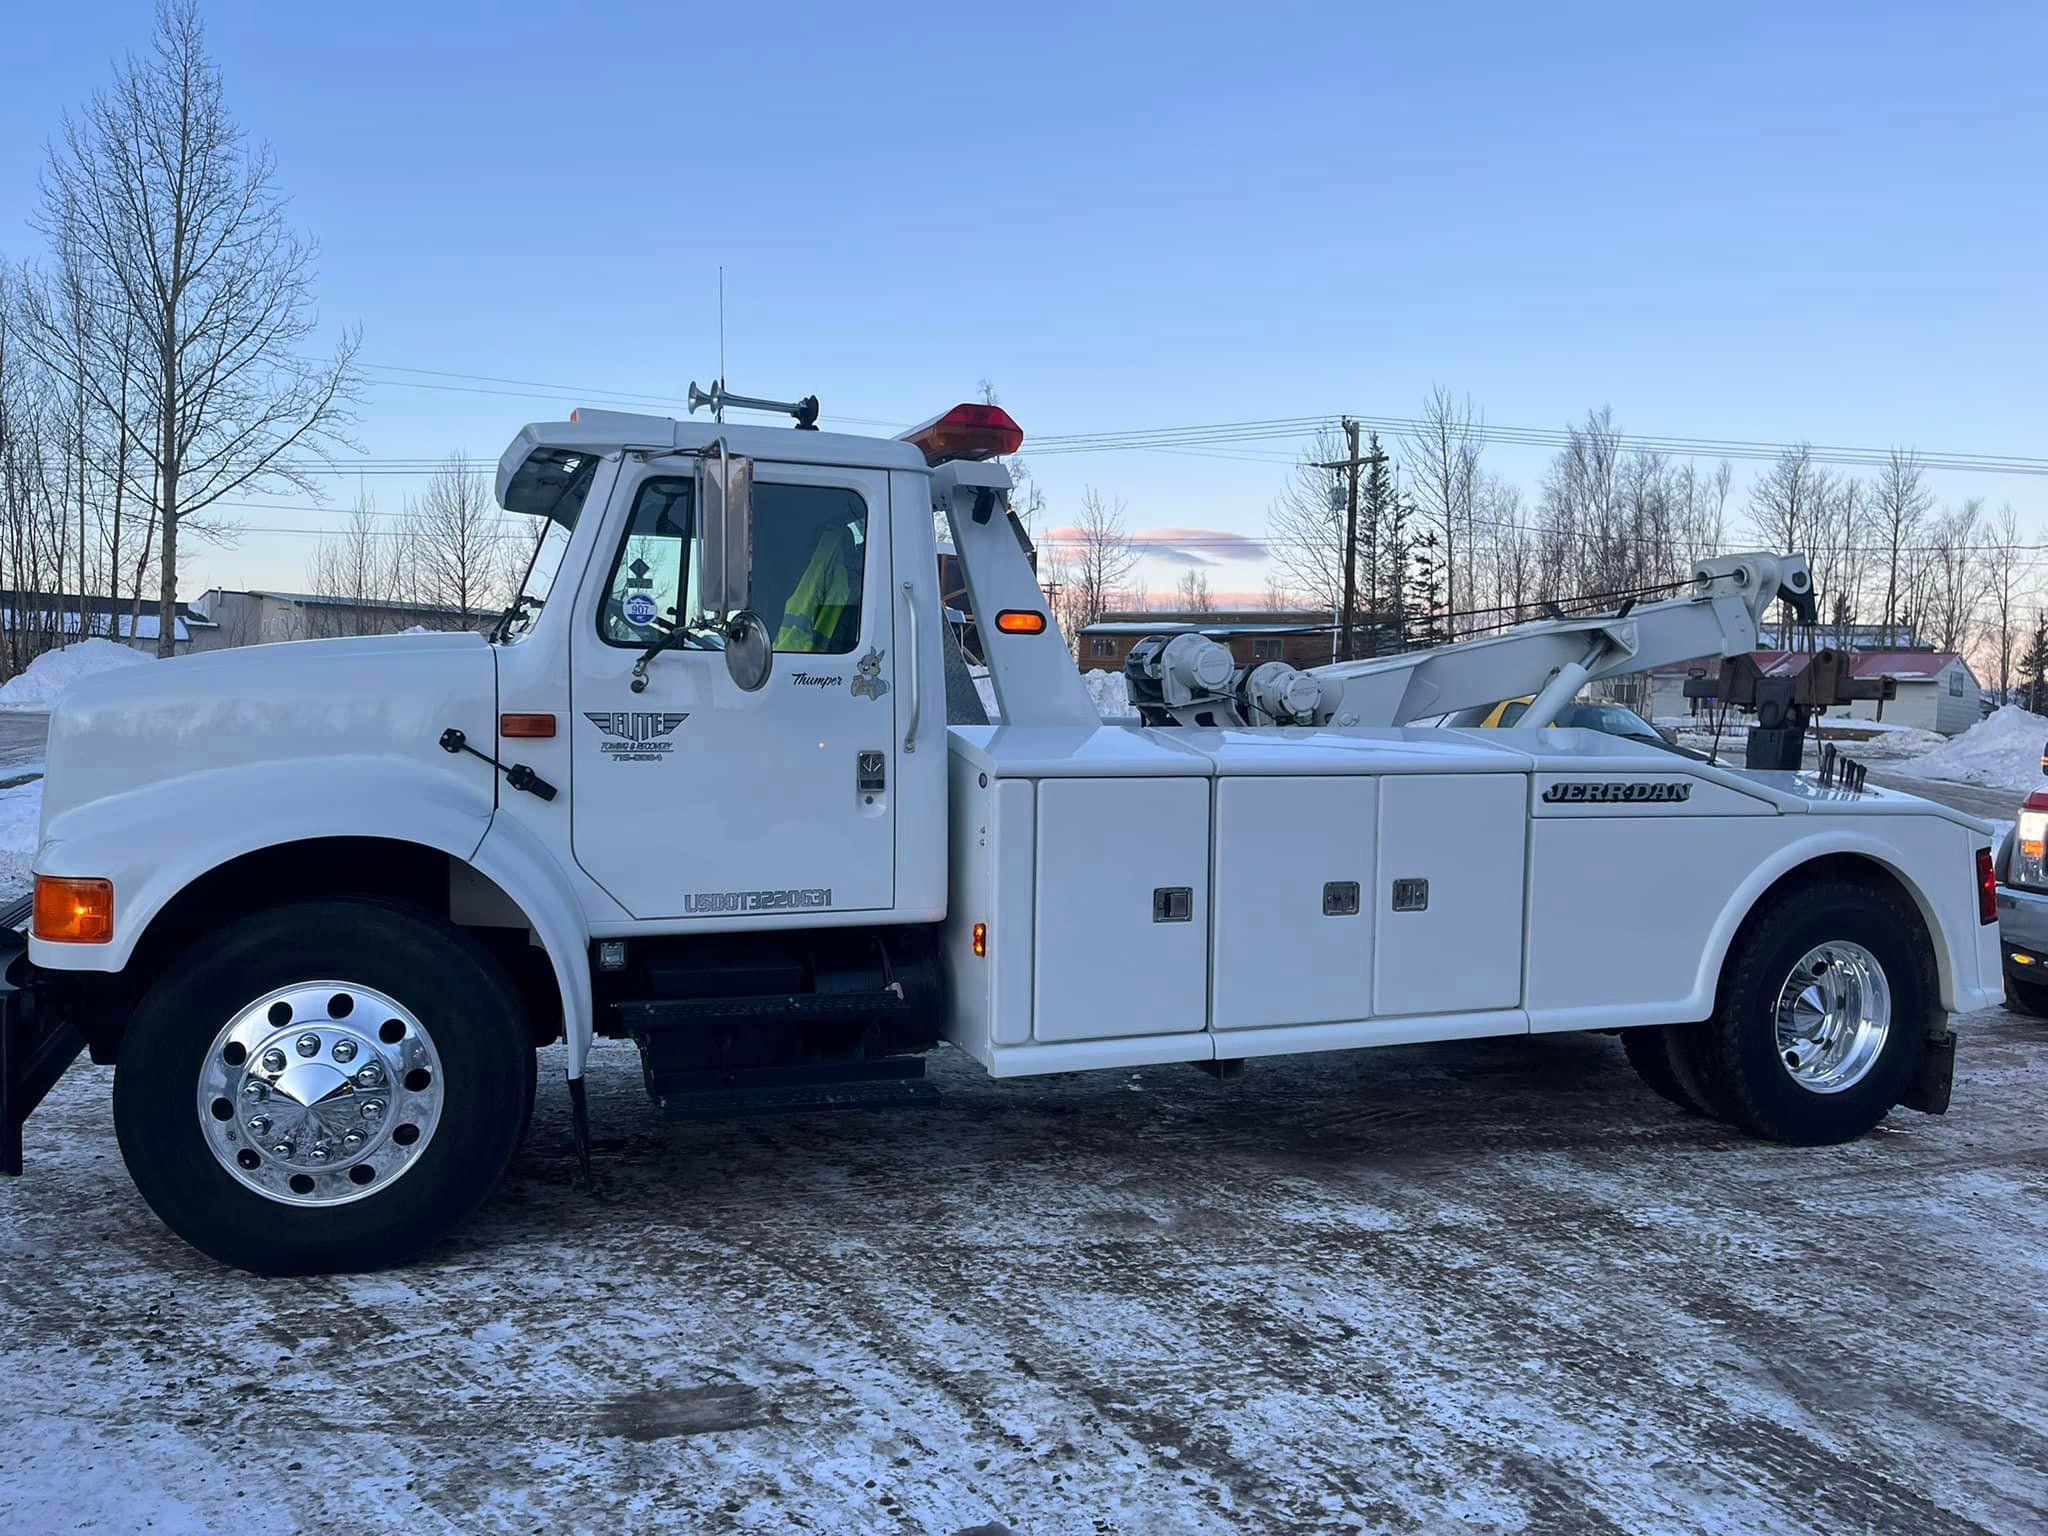 Elite Towing & Recovery Wasilla (907)715-0064